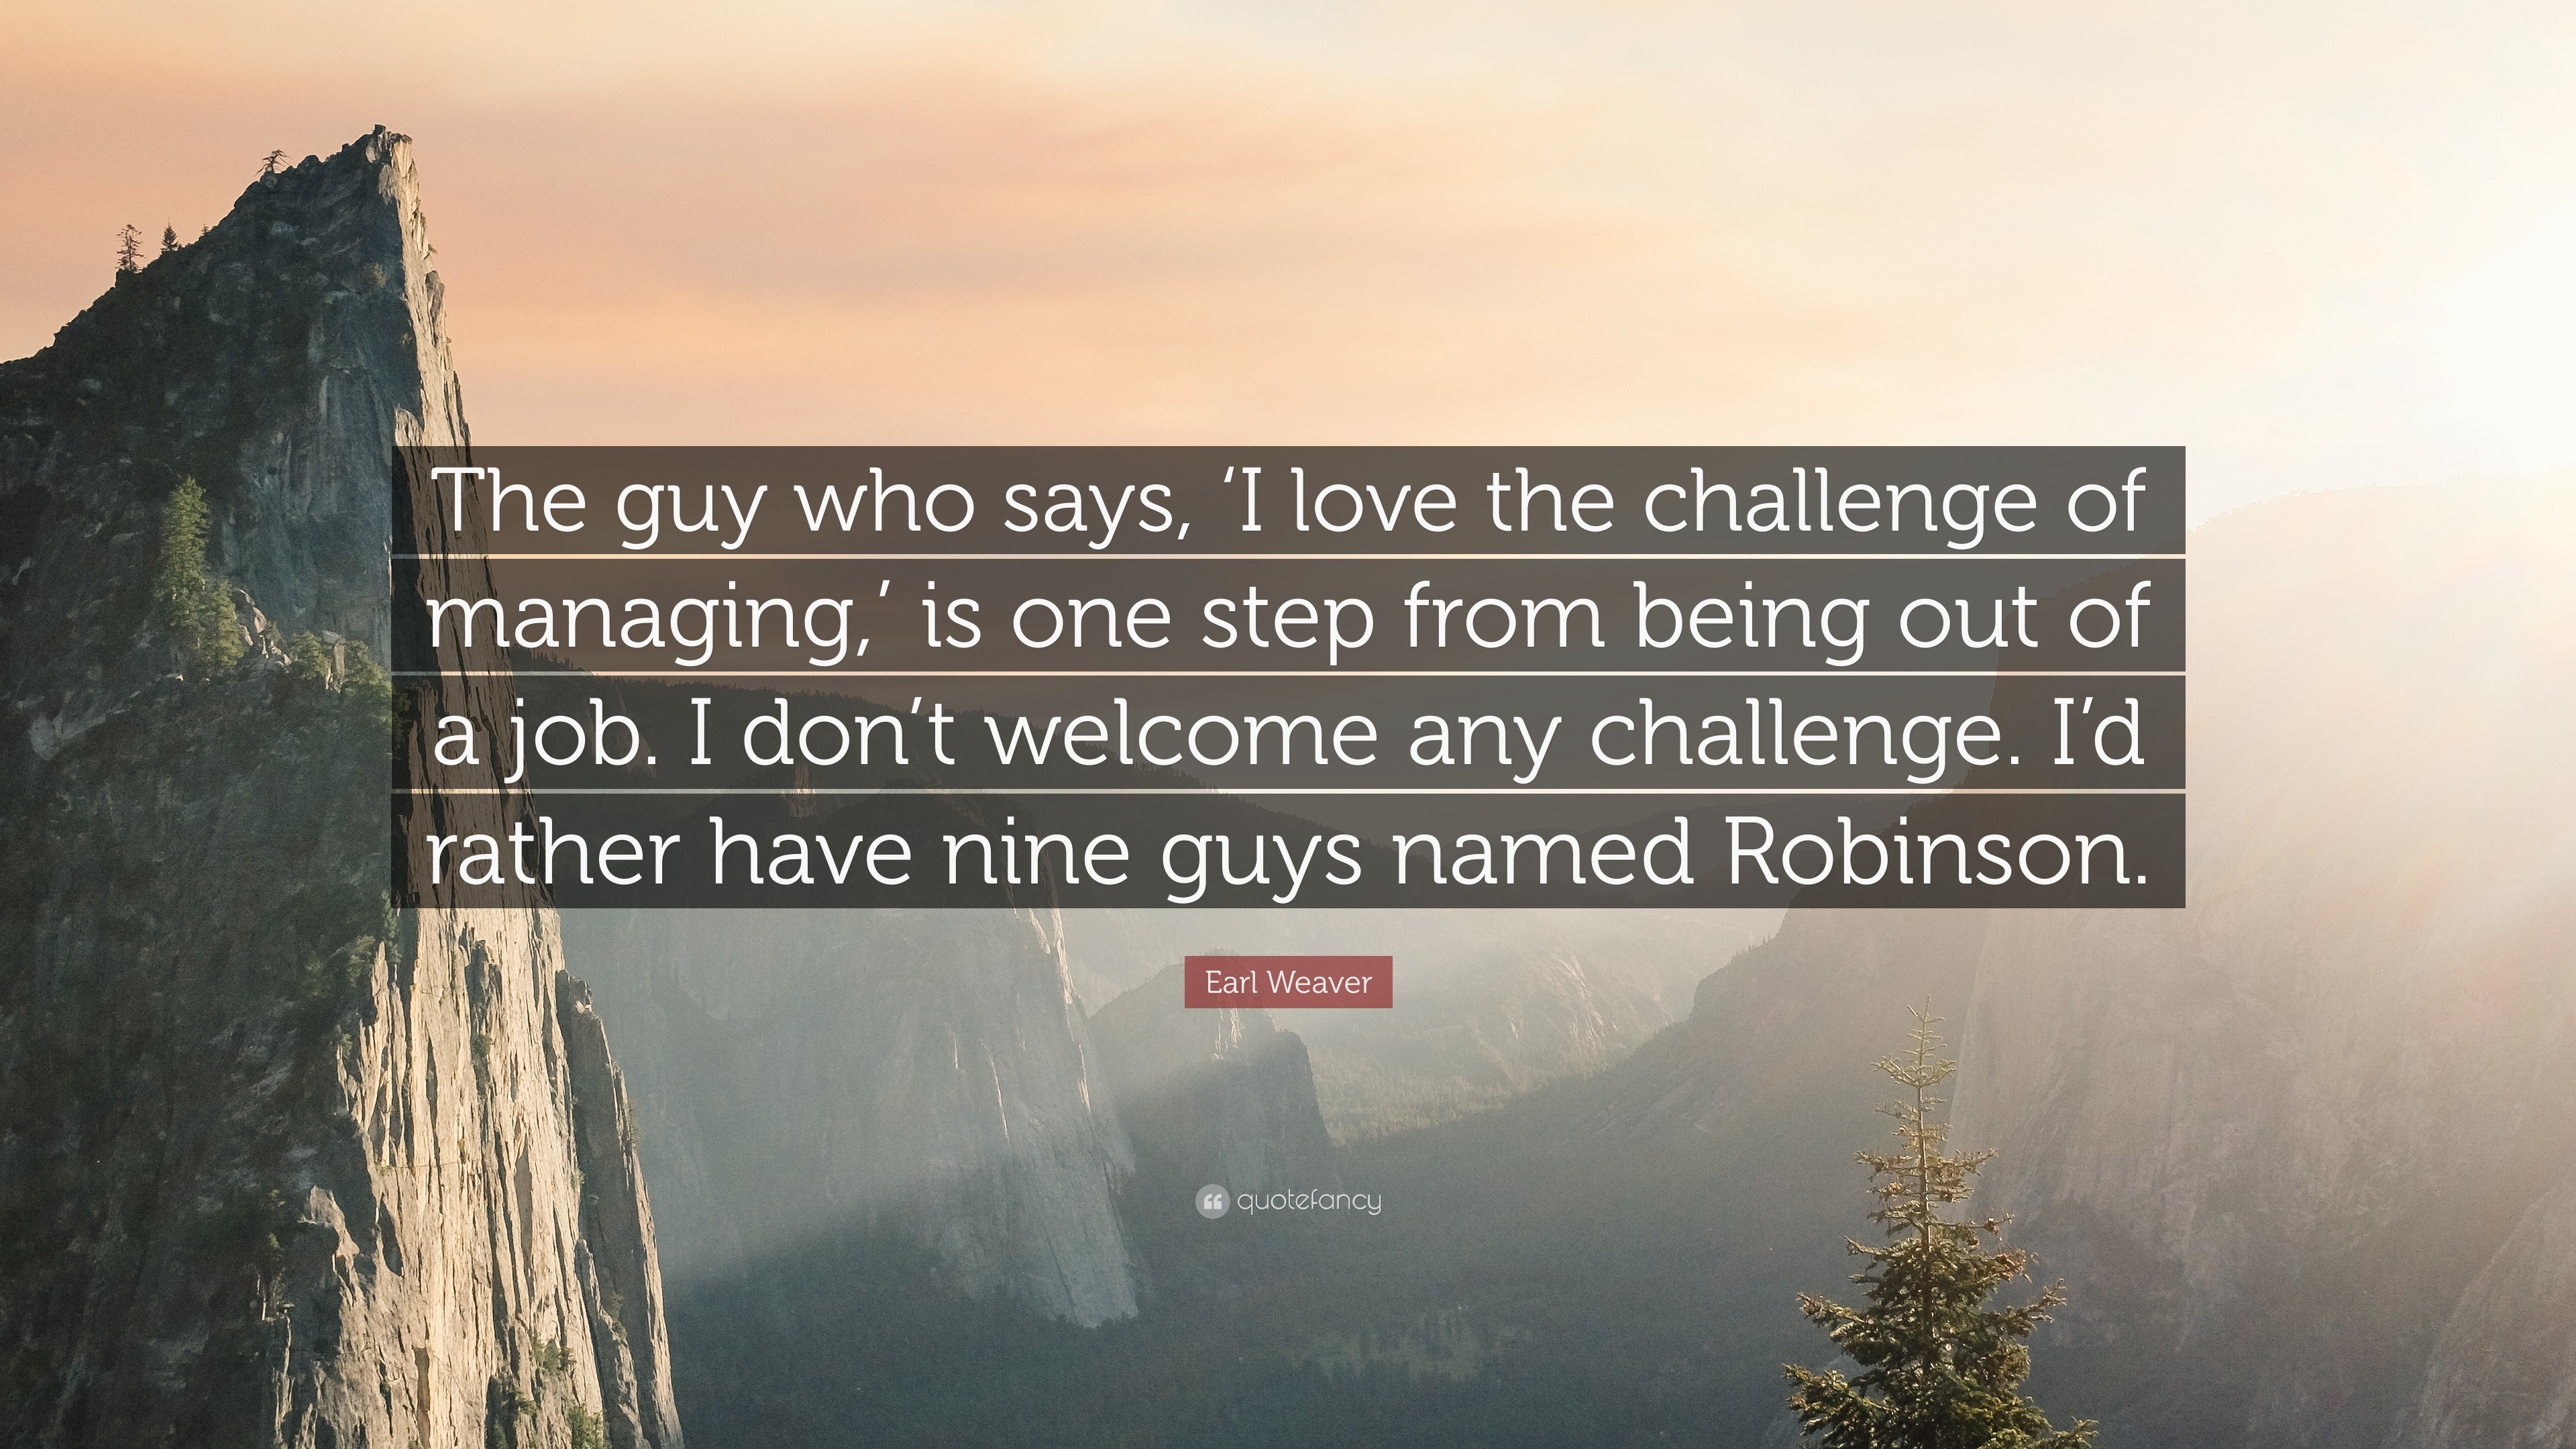 Earl Weaver quote: The guy who says, 'I love the challenge of managing